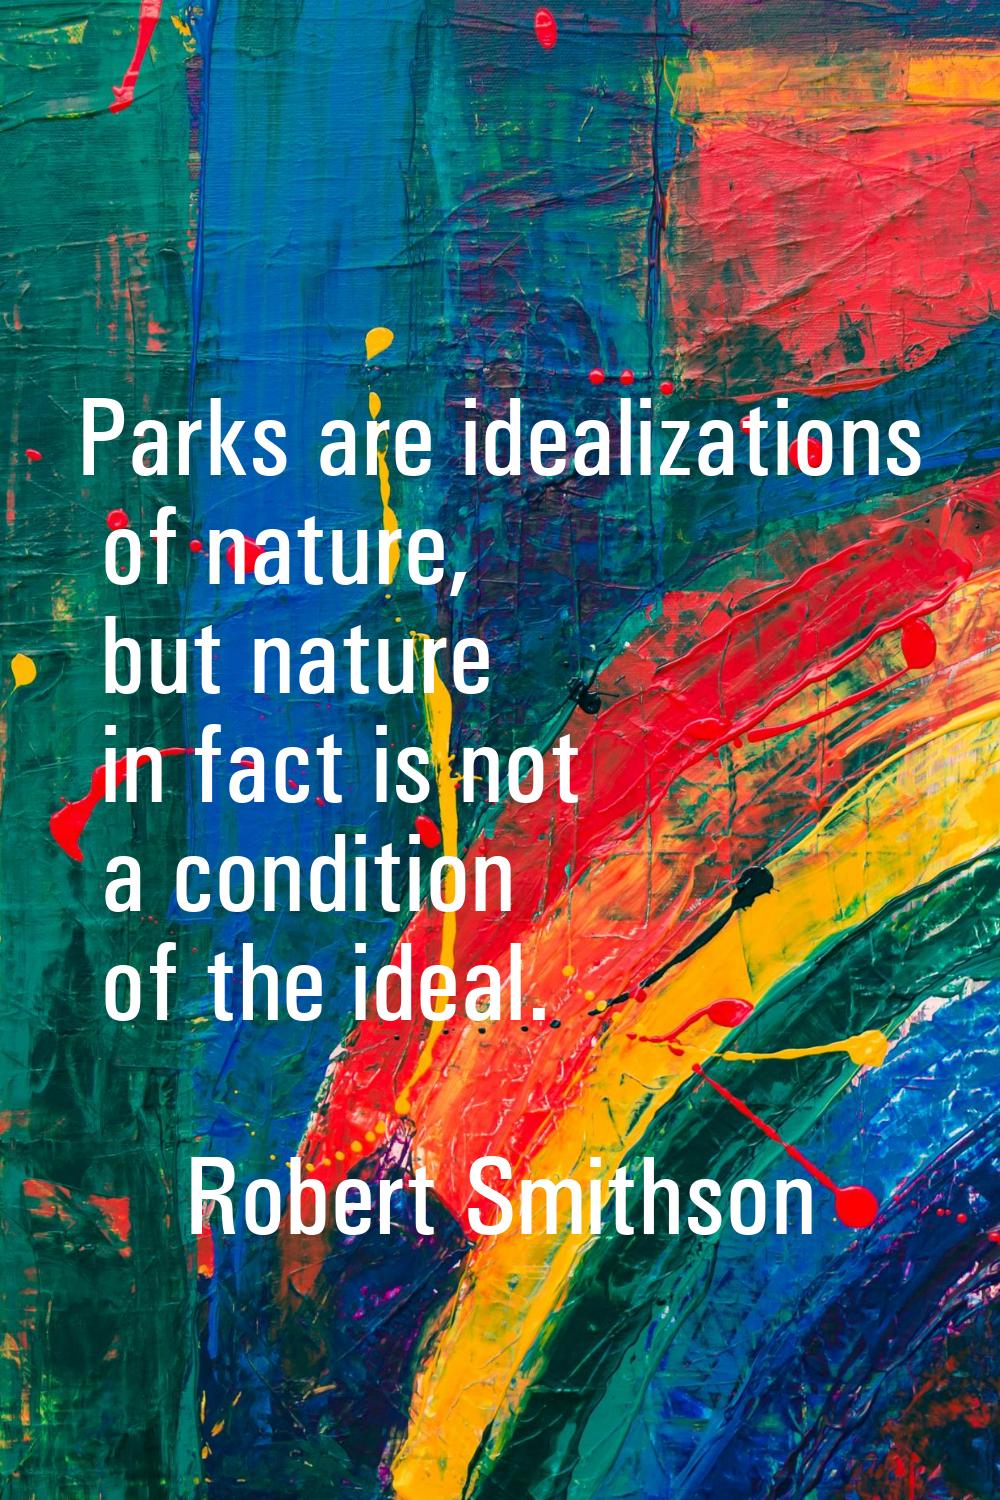 Parks are idealizations of nature, but nature in fact is not a condition of the ideal.